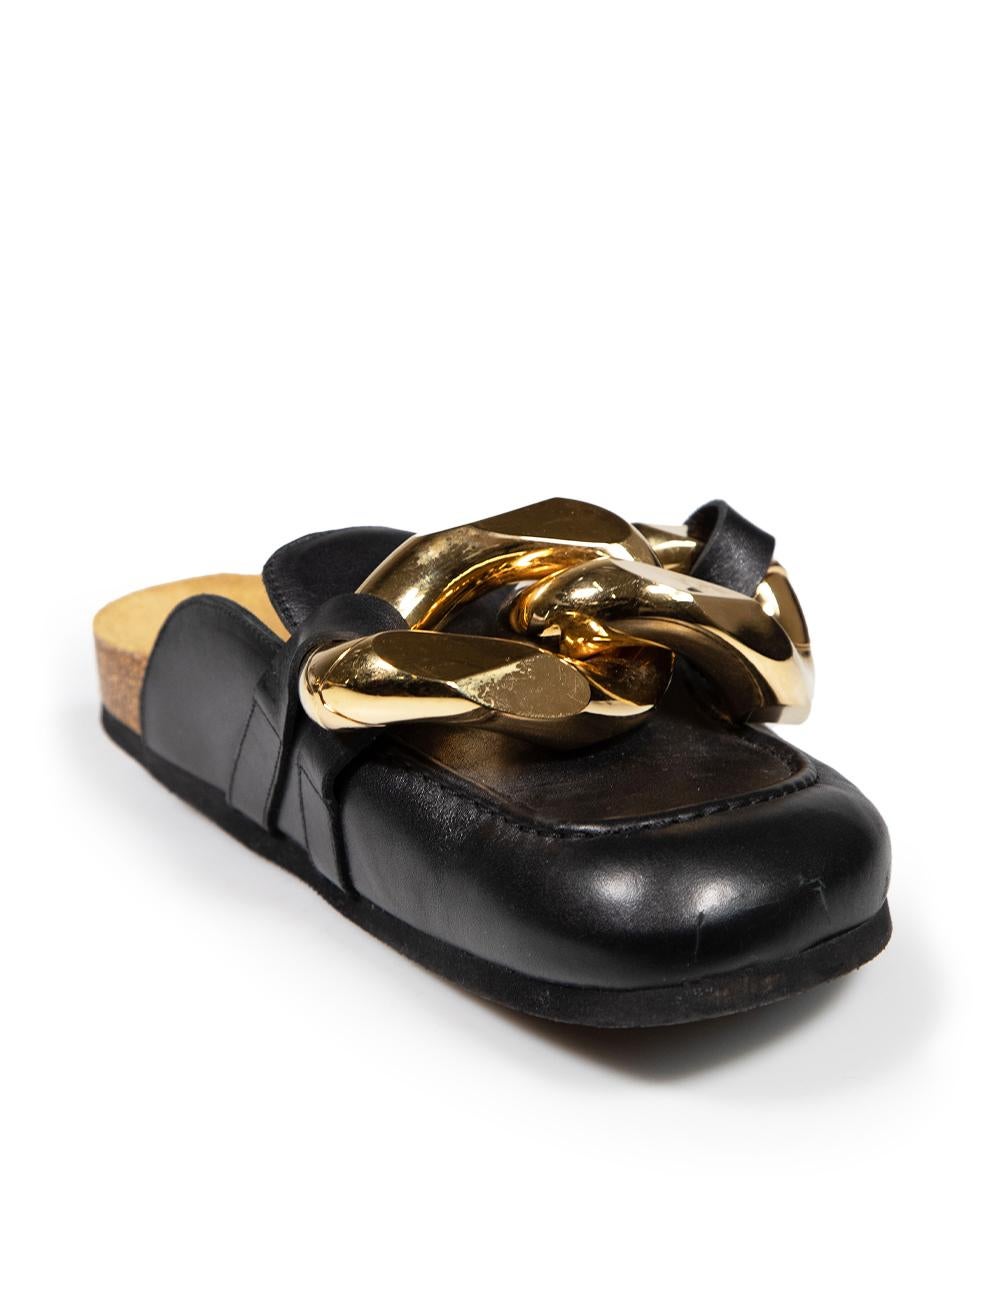 CONDITION is Good. Minor wear to mules is evident. Light scratches to tip of both shoes on this used J.W.Anderson designer resale item.
 
 
 
 Details
 
 
 Black
 
 Leather
 
 Mules
 
 Flat
 
 Oversized gold chain detail
 
 Round toe
 
 
 
 
 
 Made